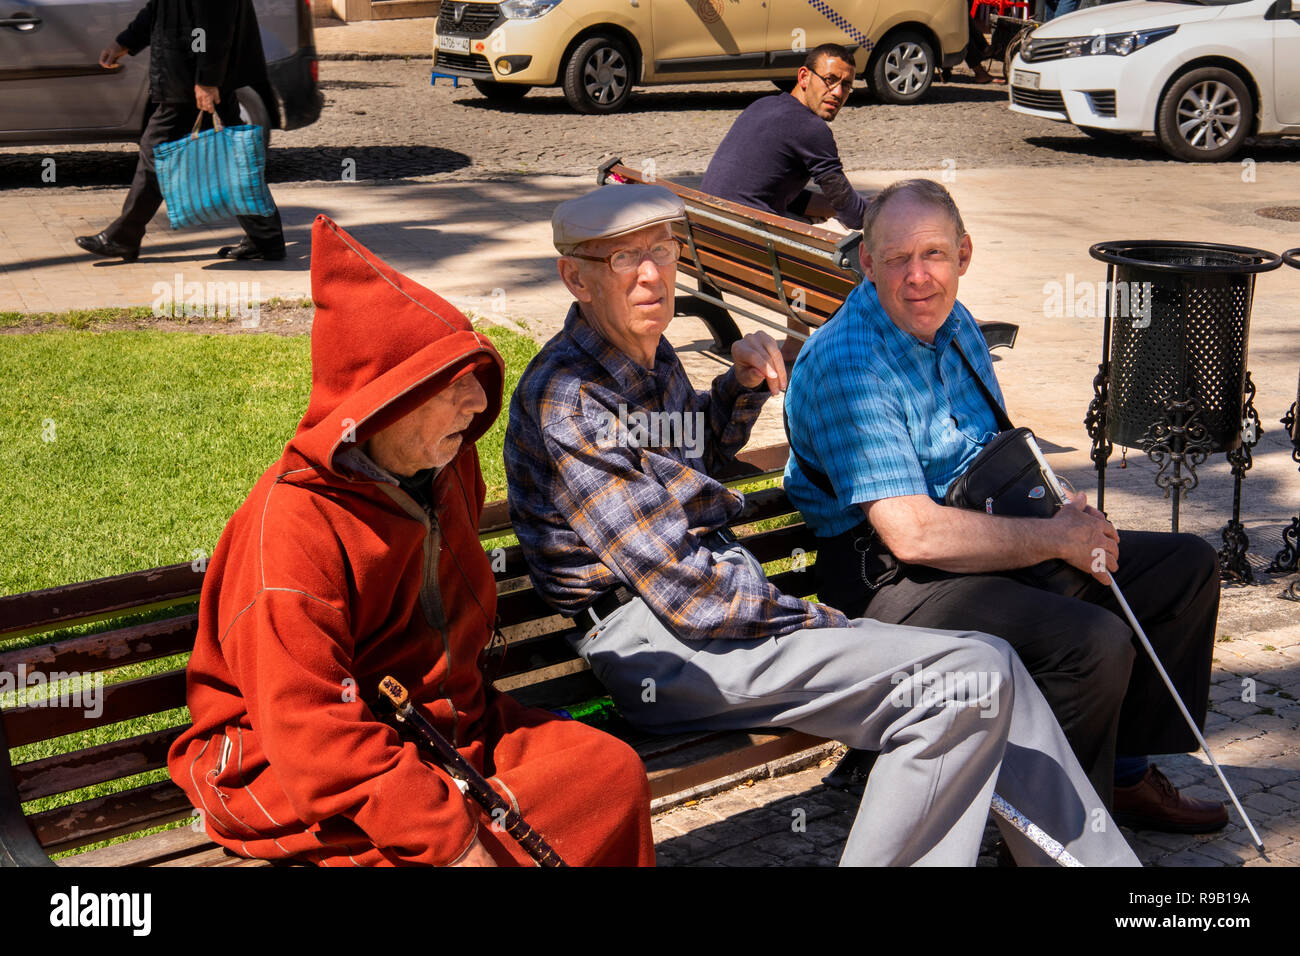 Morocco, Tangier, Place 9 Avril, Grand Socco public square, tourists sat on bench beside man in djellaba coat Stock Photo